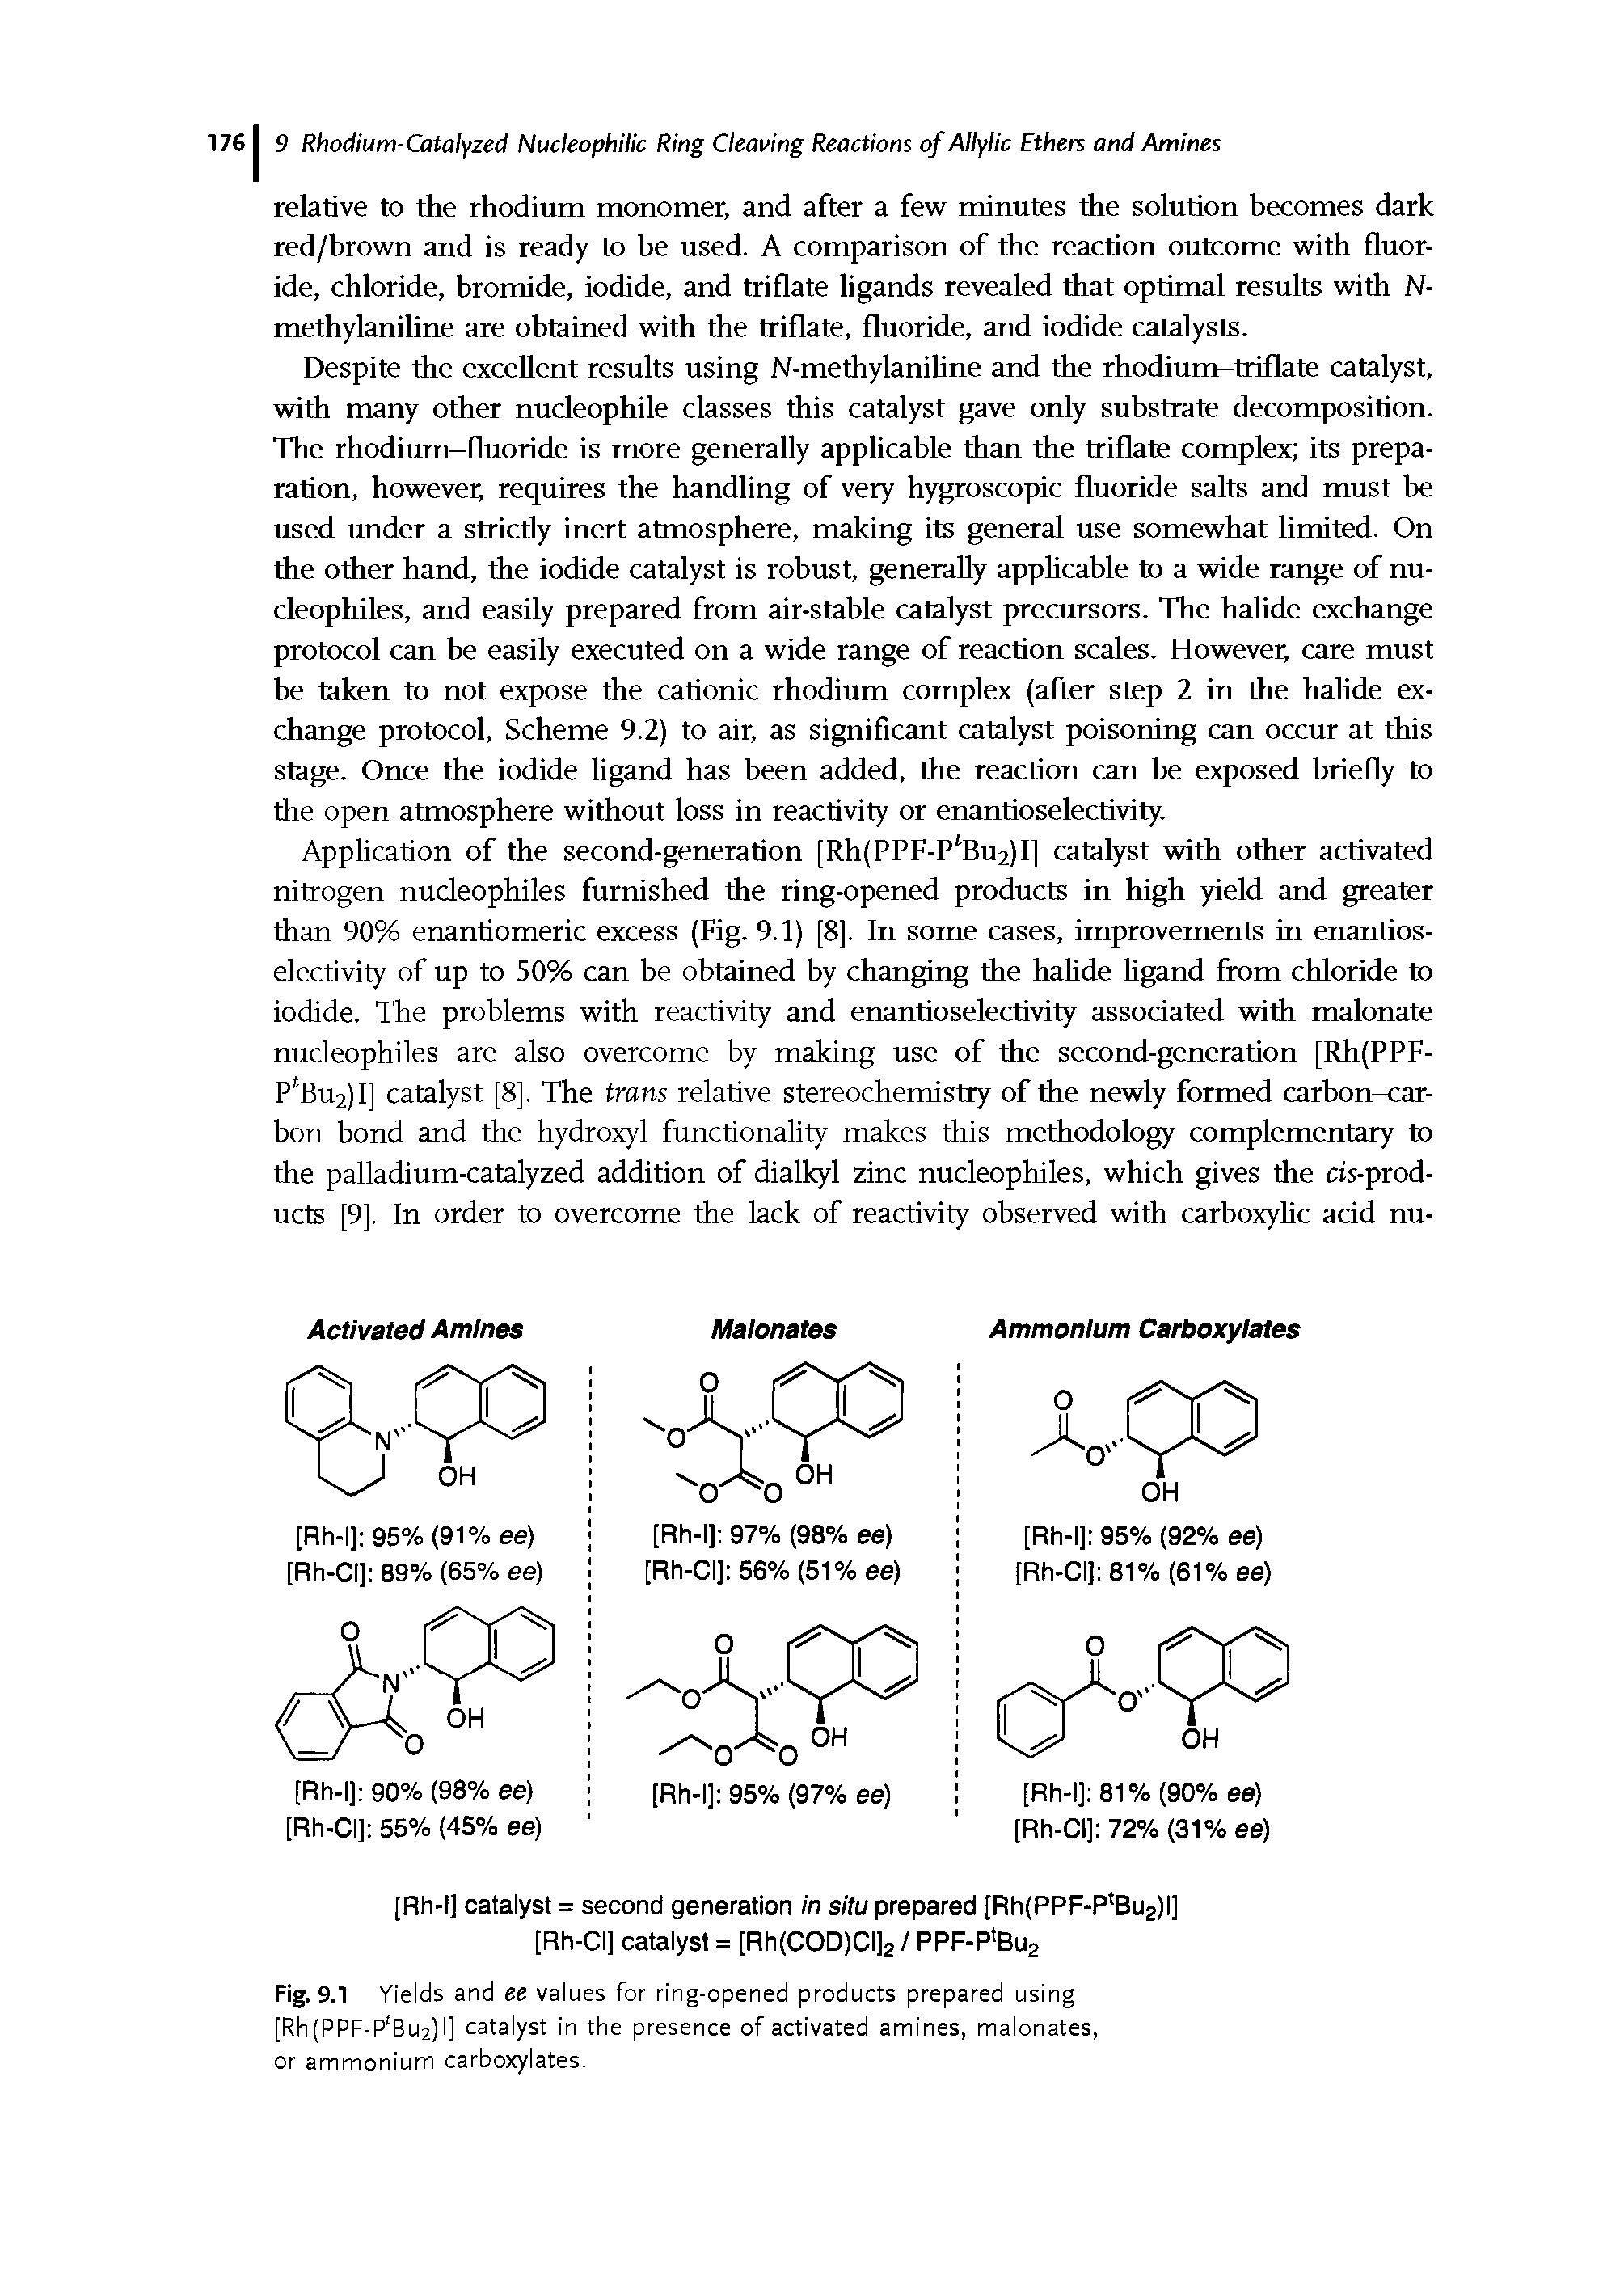 Fig. 9.1 Yields and ee values for ring-opened products prepared using [Rh(PPF-P Bu2)l] catalyst in the presence of activated amines, malonates, or ammonium carboxylates.